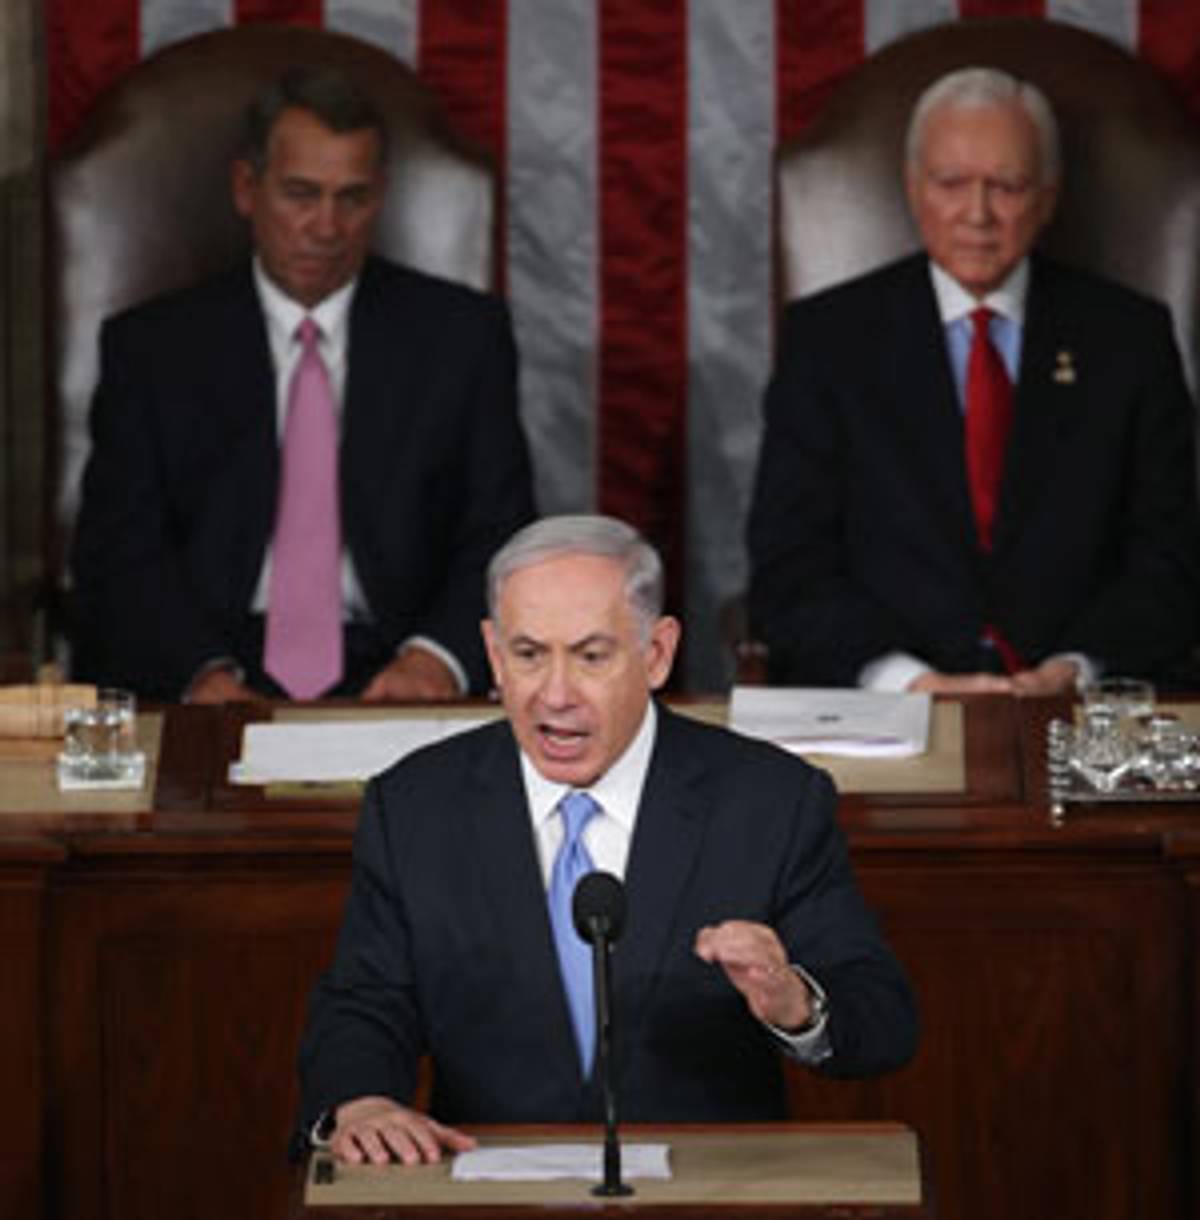 Benjamin Netanyahu speaks during a joint meeting of the United States Congress in the House chamber at the U.S. Capitol March 3, 2015 in Washington, DC.